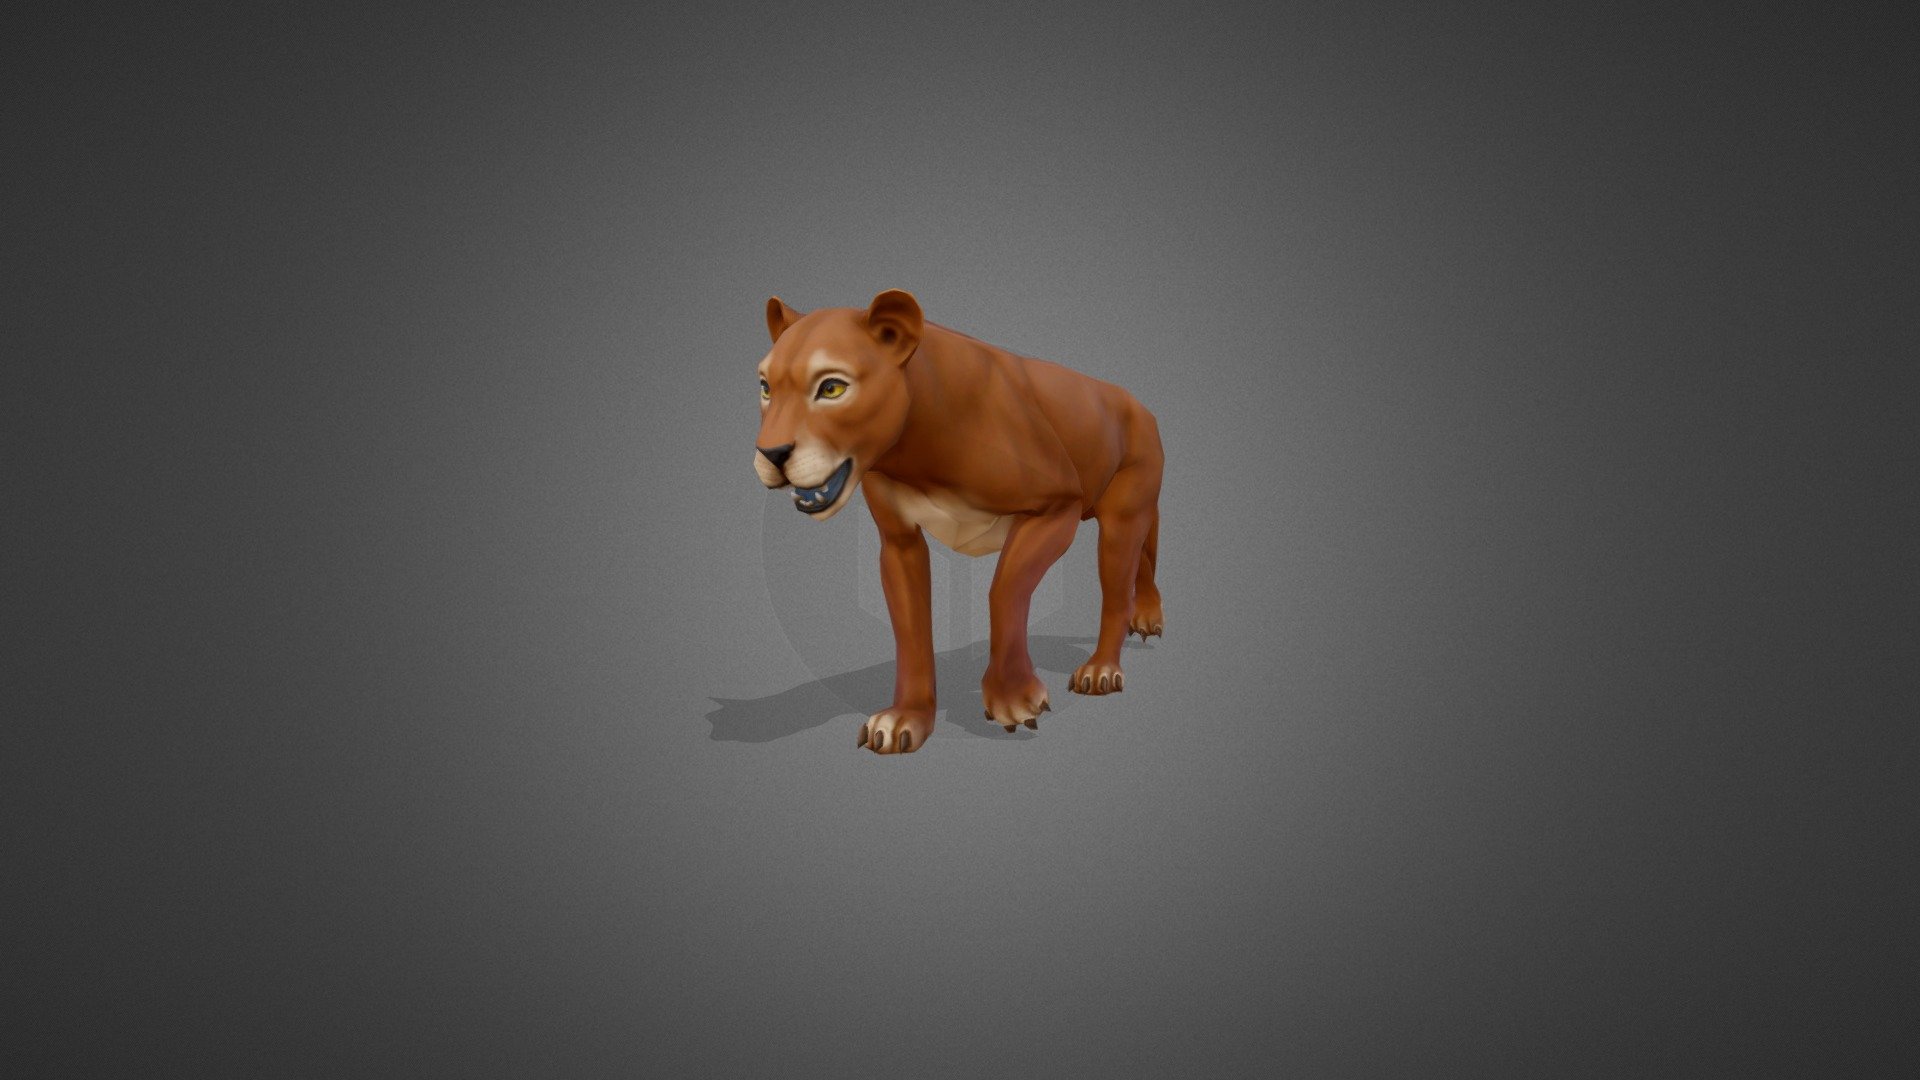 All rights belongs to Pride Games Studio

Model and textures made by Anton Milashin. 
All animations made by hand keying. This lioness is a pet in mobile game EXILE SURVIVAL. First of all i watched many  references for this lion animations after that i've made a rig for him, skin and after that, created this animations using Maya. In the end this game asset is ready for use in Unity project 3d model